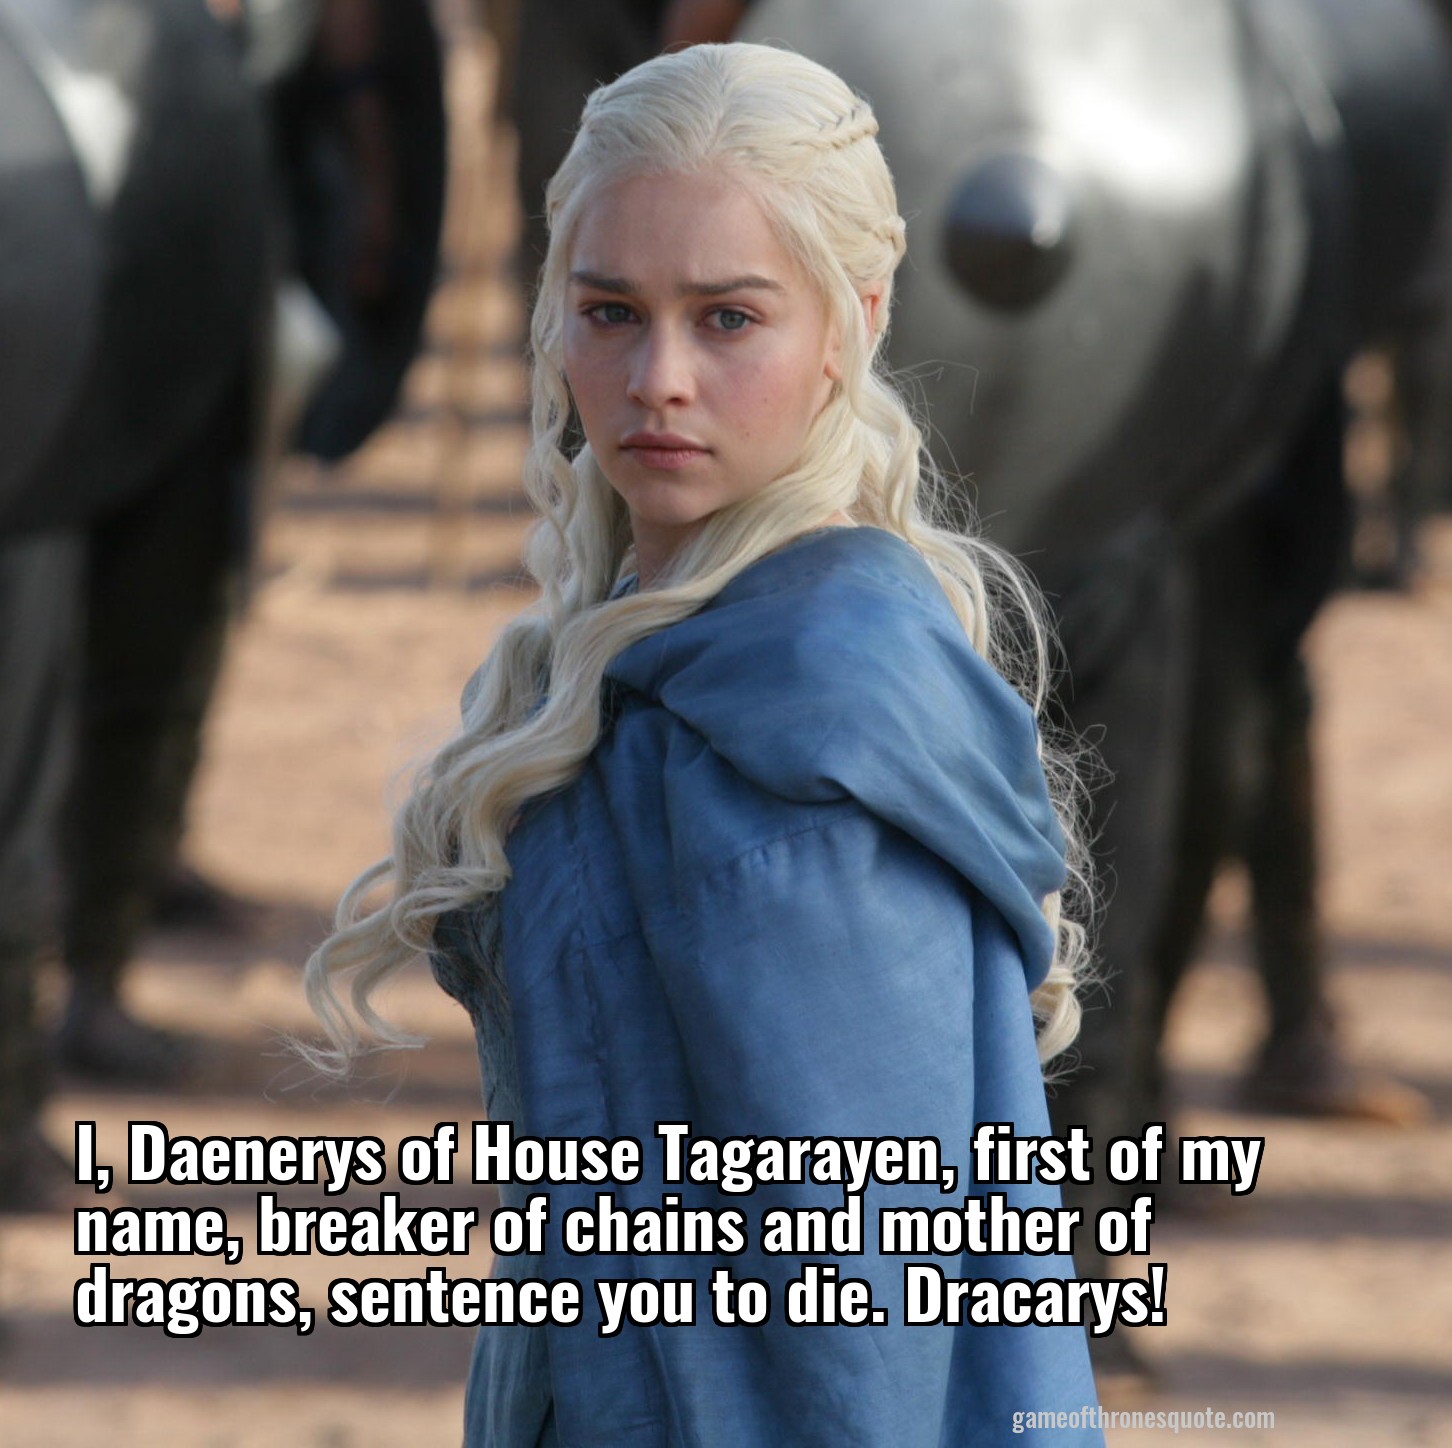 I, Daenerys of House Tagarayen, first of my name, breaker of chains and mother of dragons, sentence you to die. Dracarys!